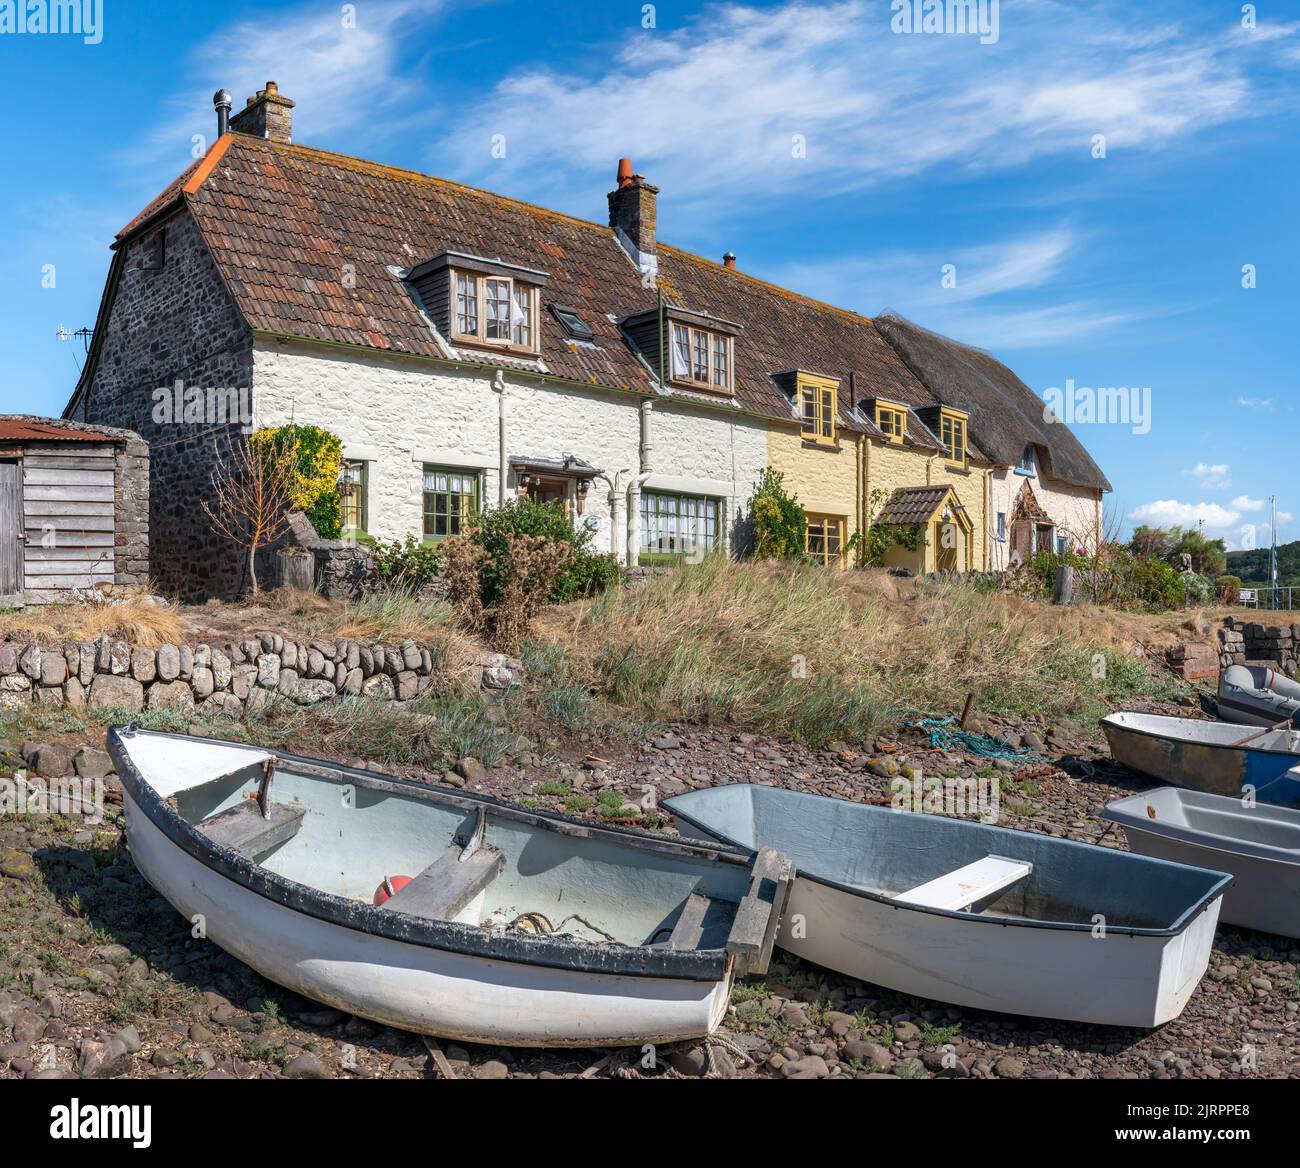 At low tide a row of small boats lie on the shingle in font of the small cottages at Porlock Weir in Somerset. Stock Photo